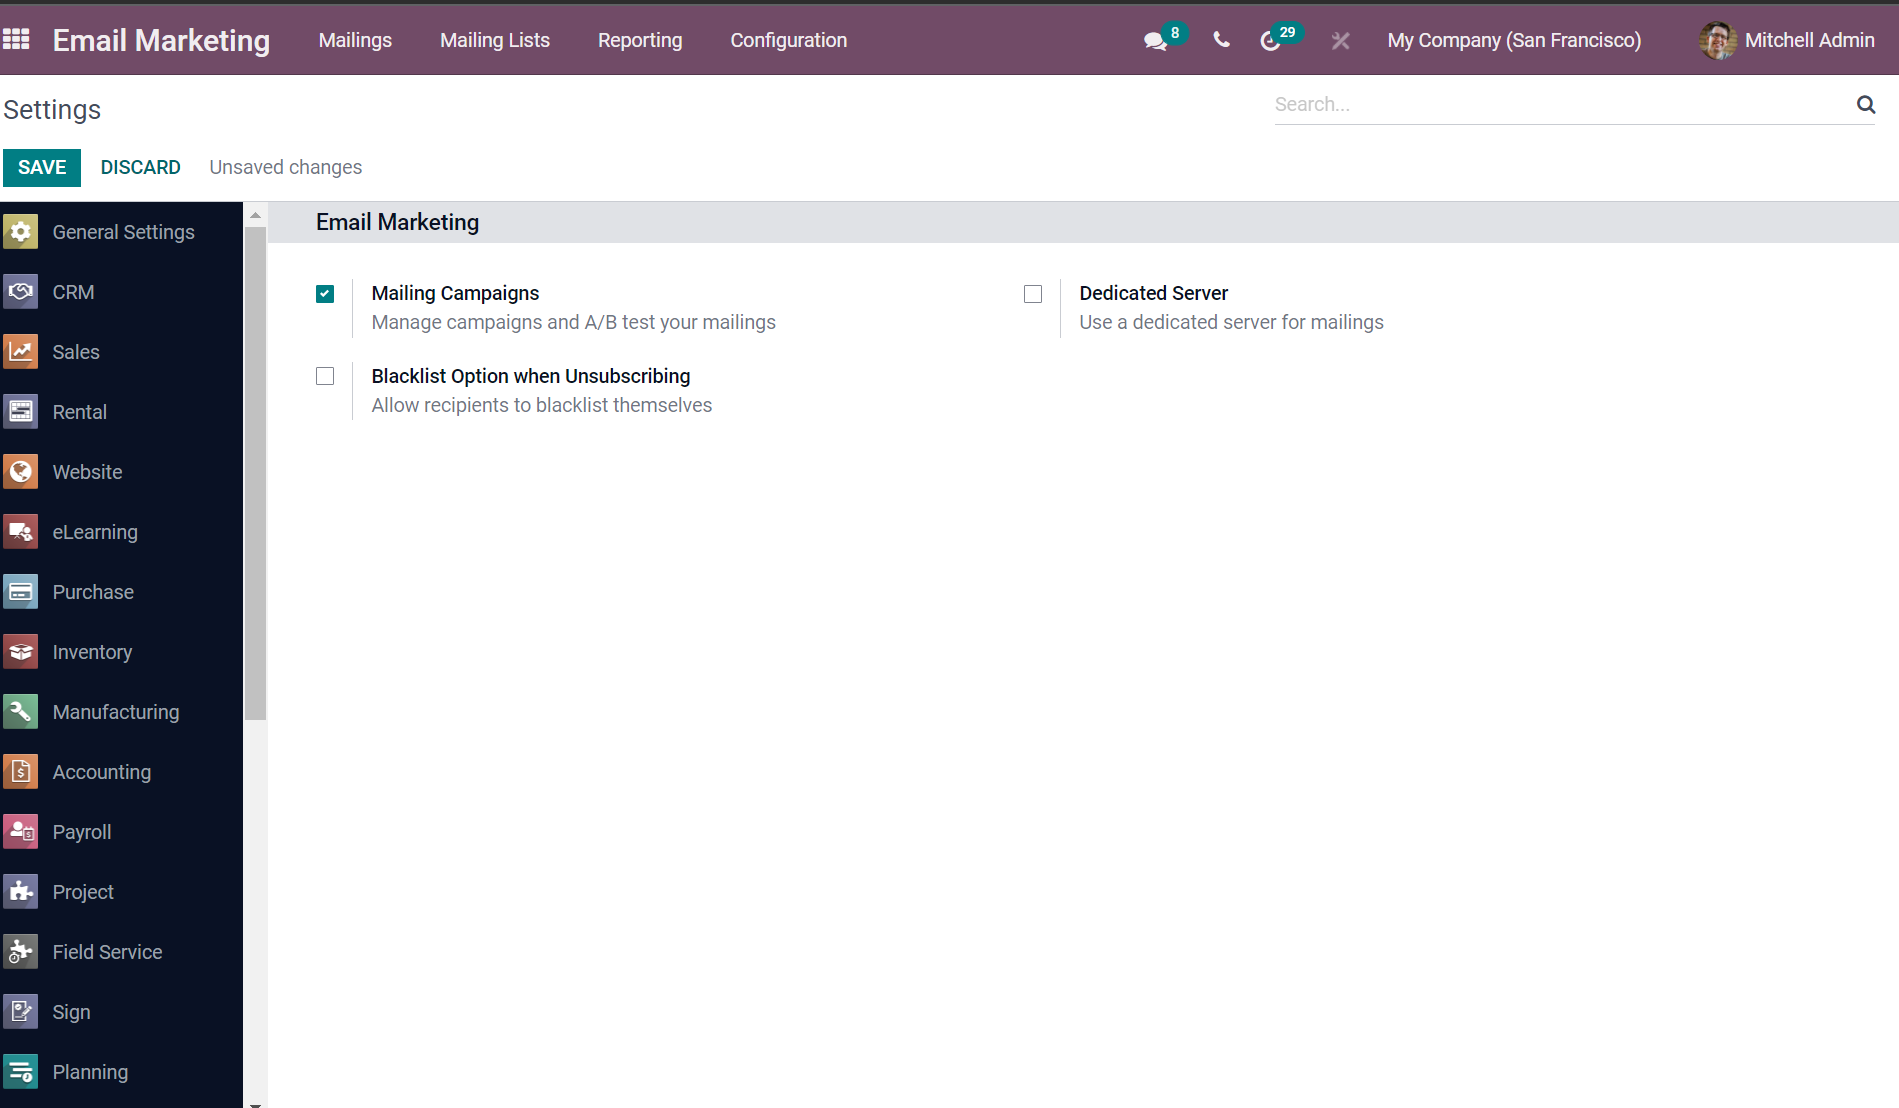 odoo Mailing campaigns